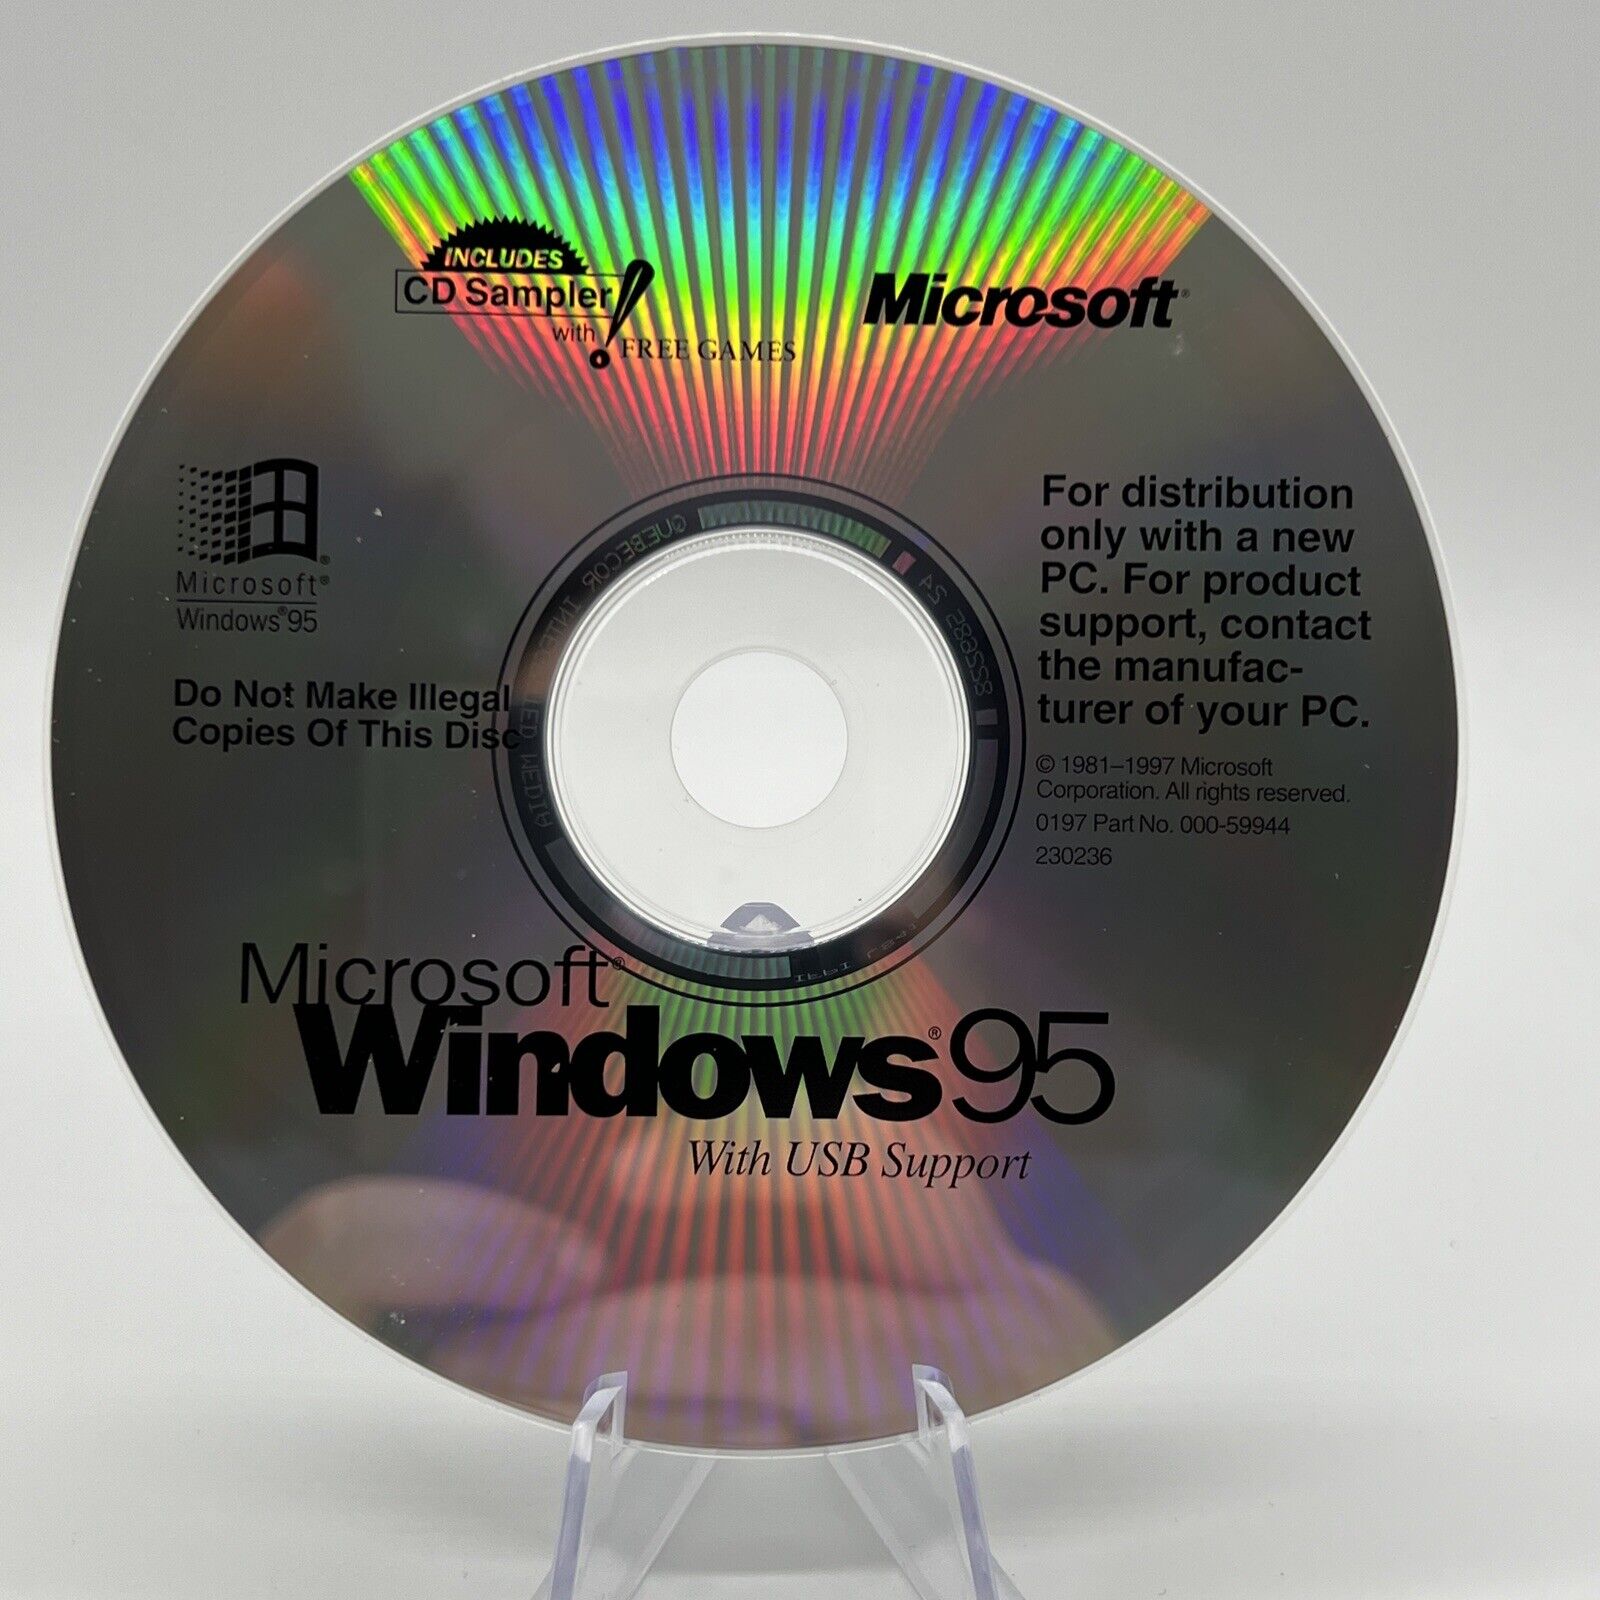 Windows 95 PC CD-ROM ONLY w/ CD SAMPLER FREE GAMES - NO PRODUCT KEY NO CASE